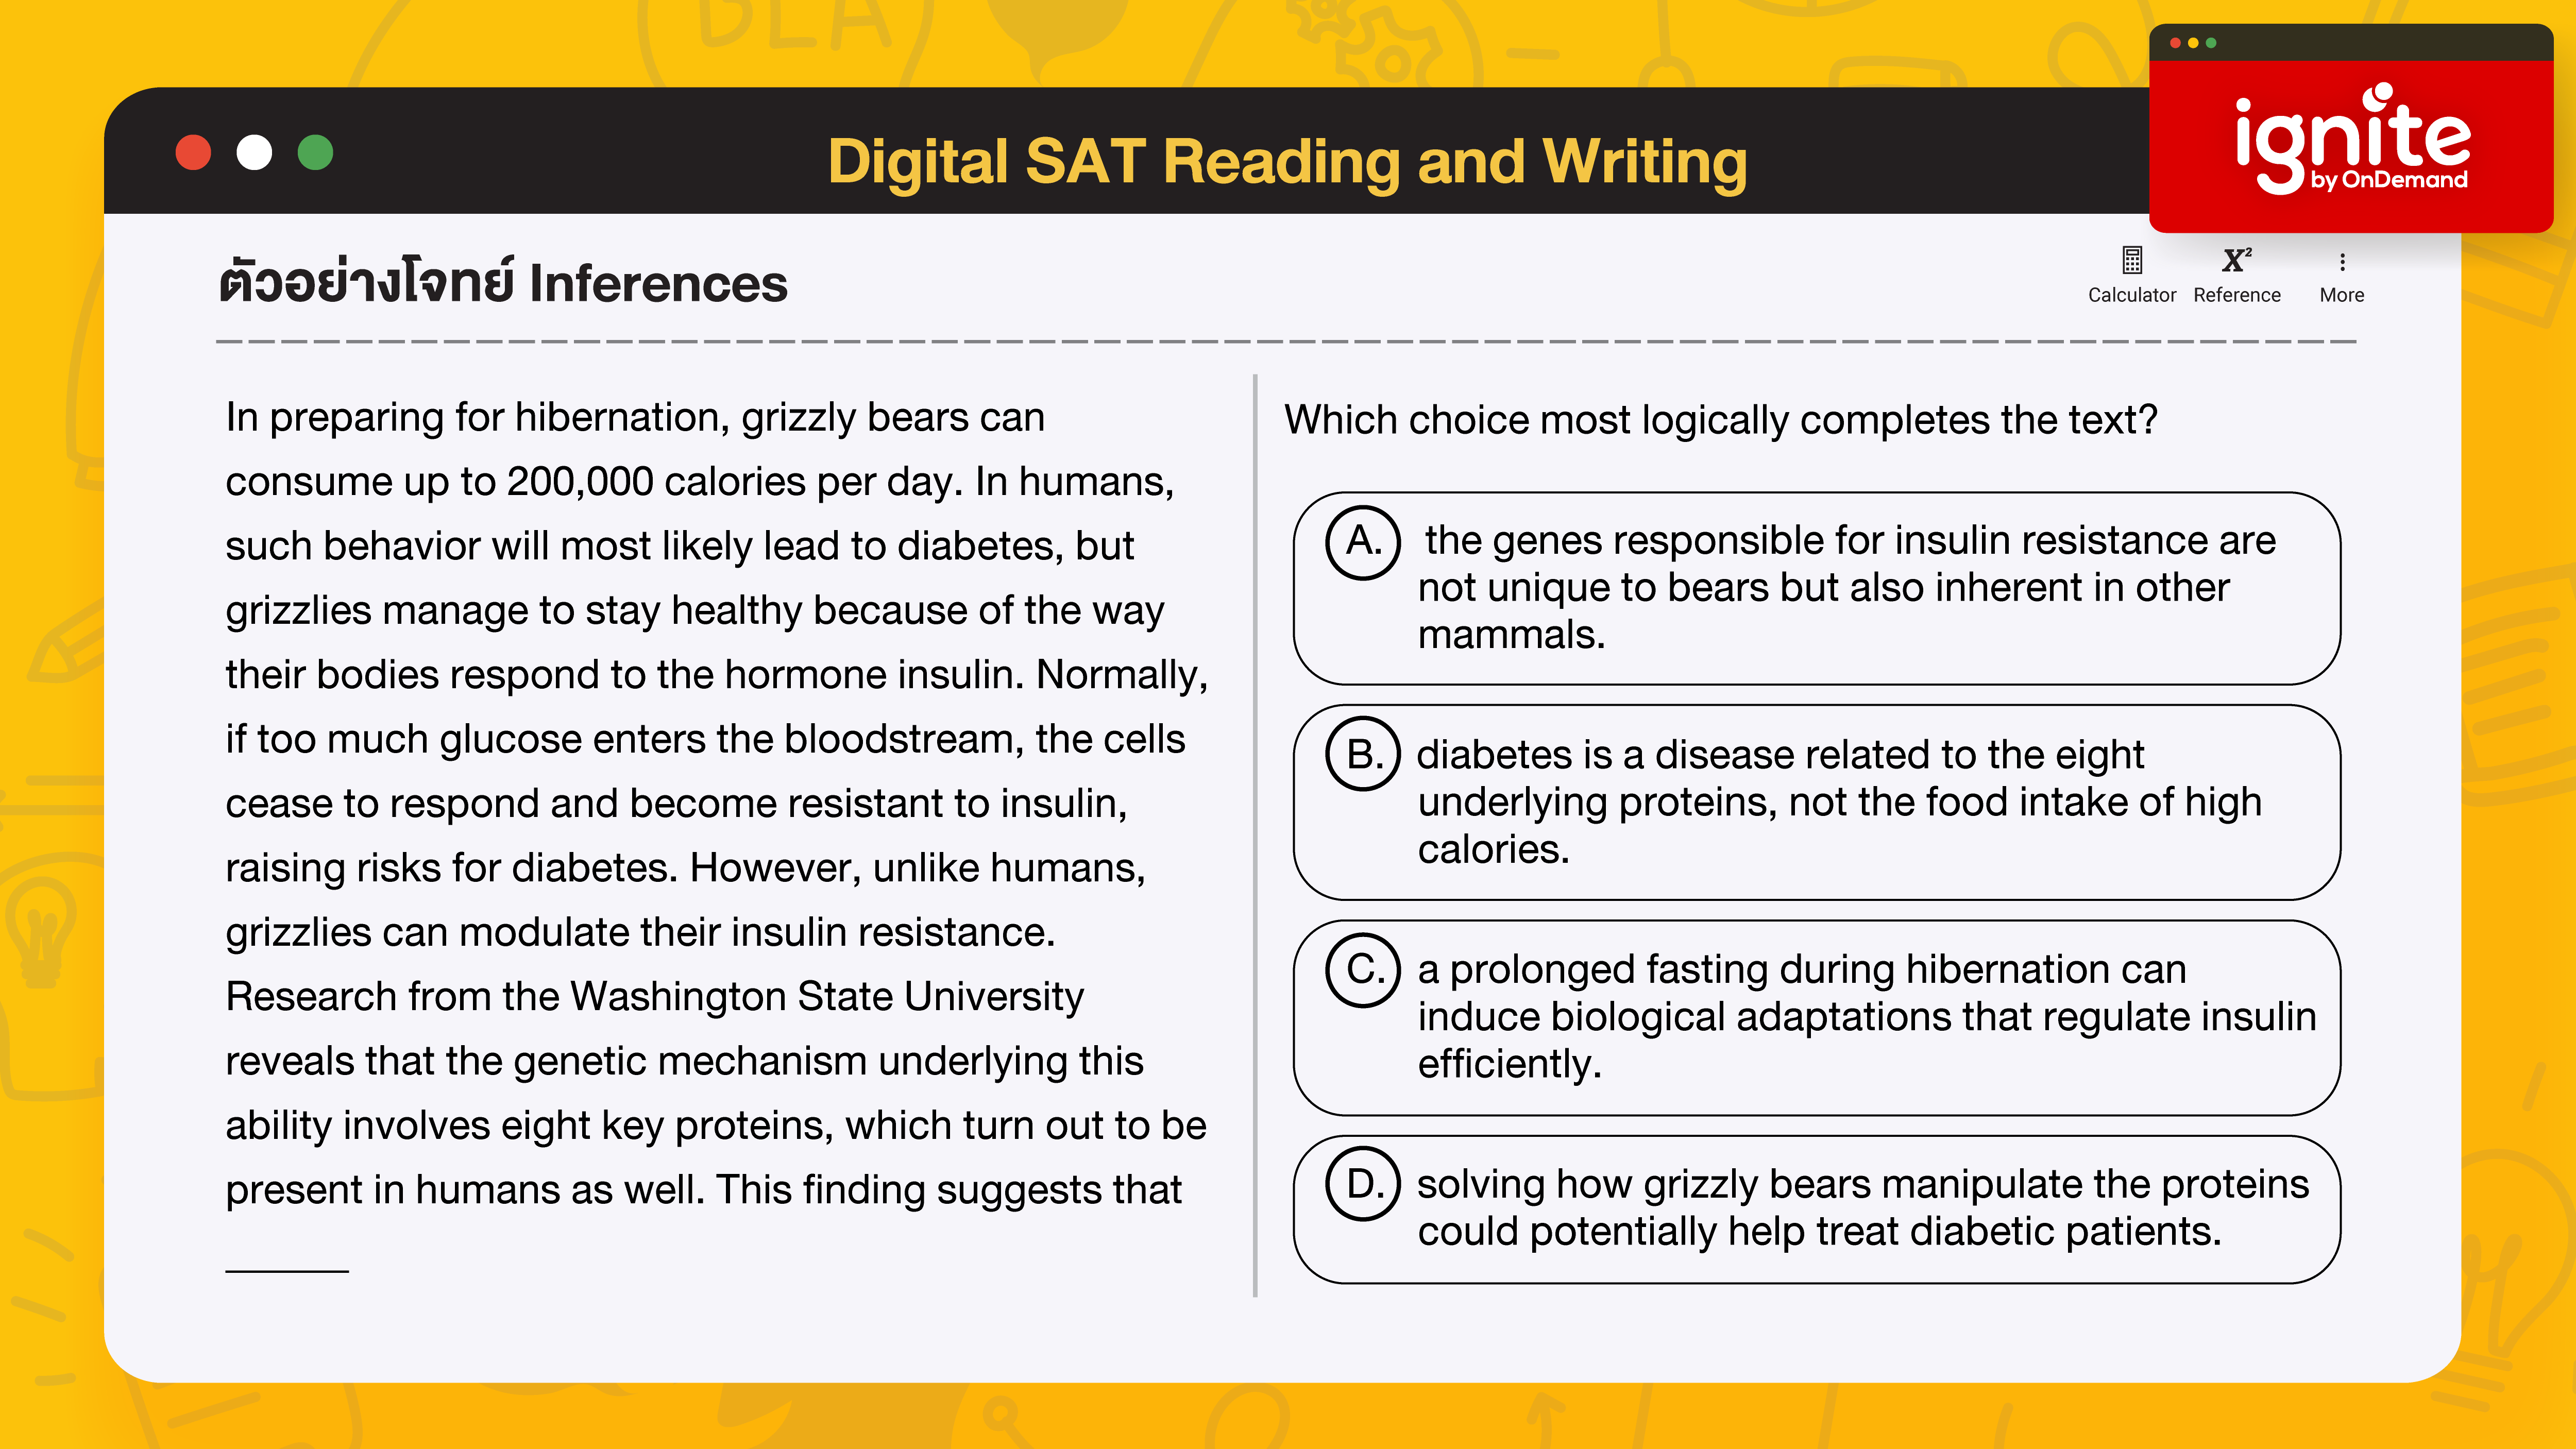 Inferences - Digital SAT Reading and Wrting 2023 - ignite by OnDemand